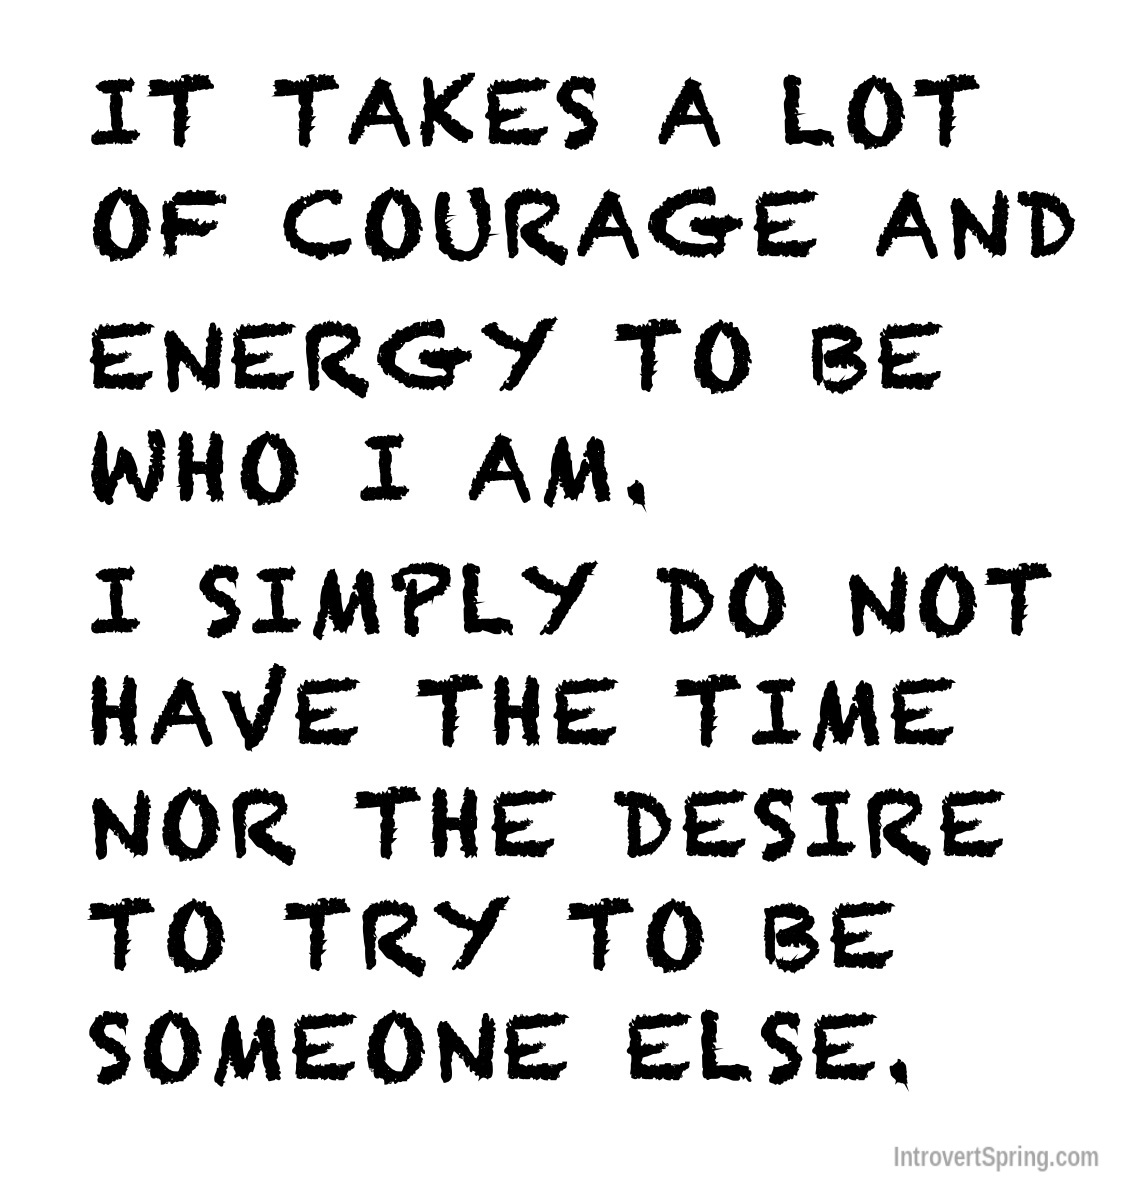 IT TAKES A LOT OF COURAGE